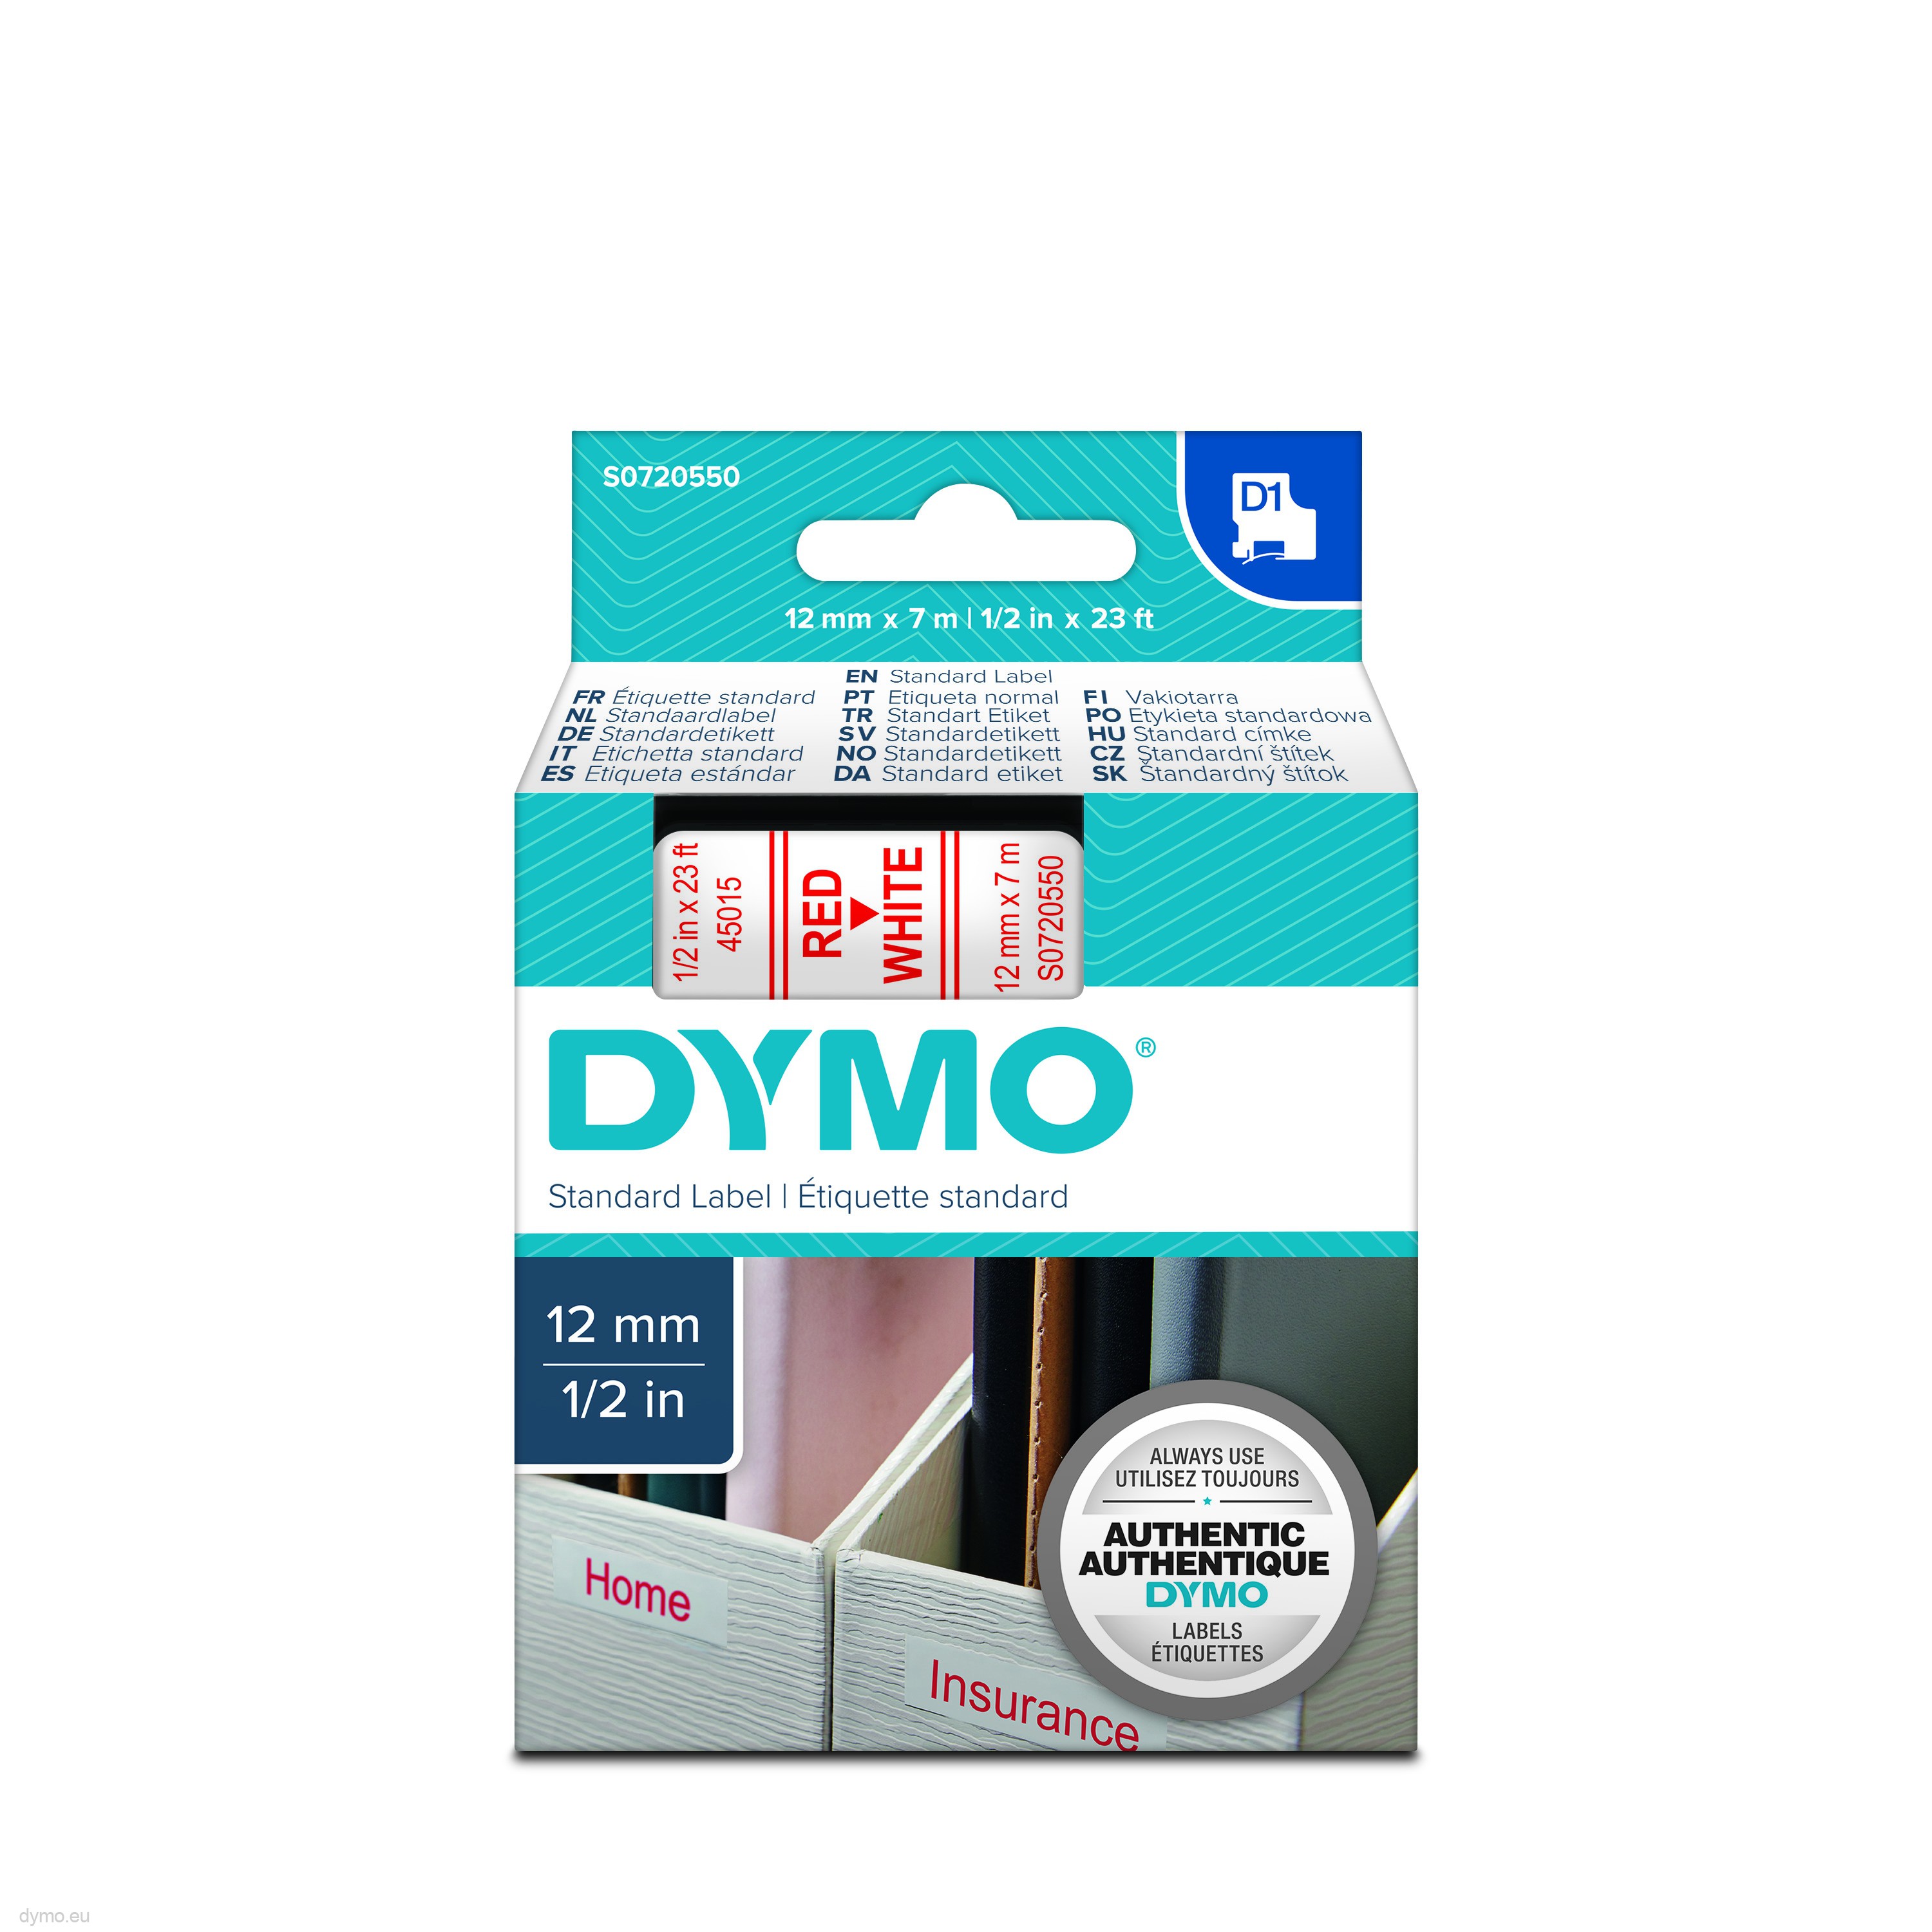 DYMO D1 Durable Label Tape for LabelManager Black on White S0720530-45013 